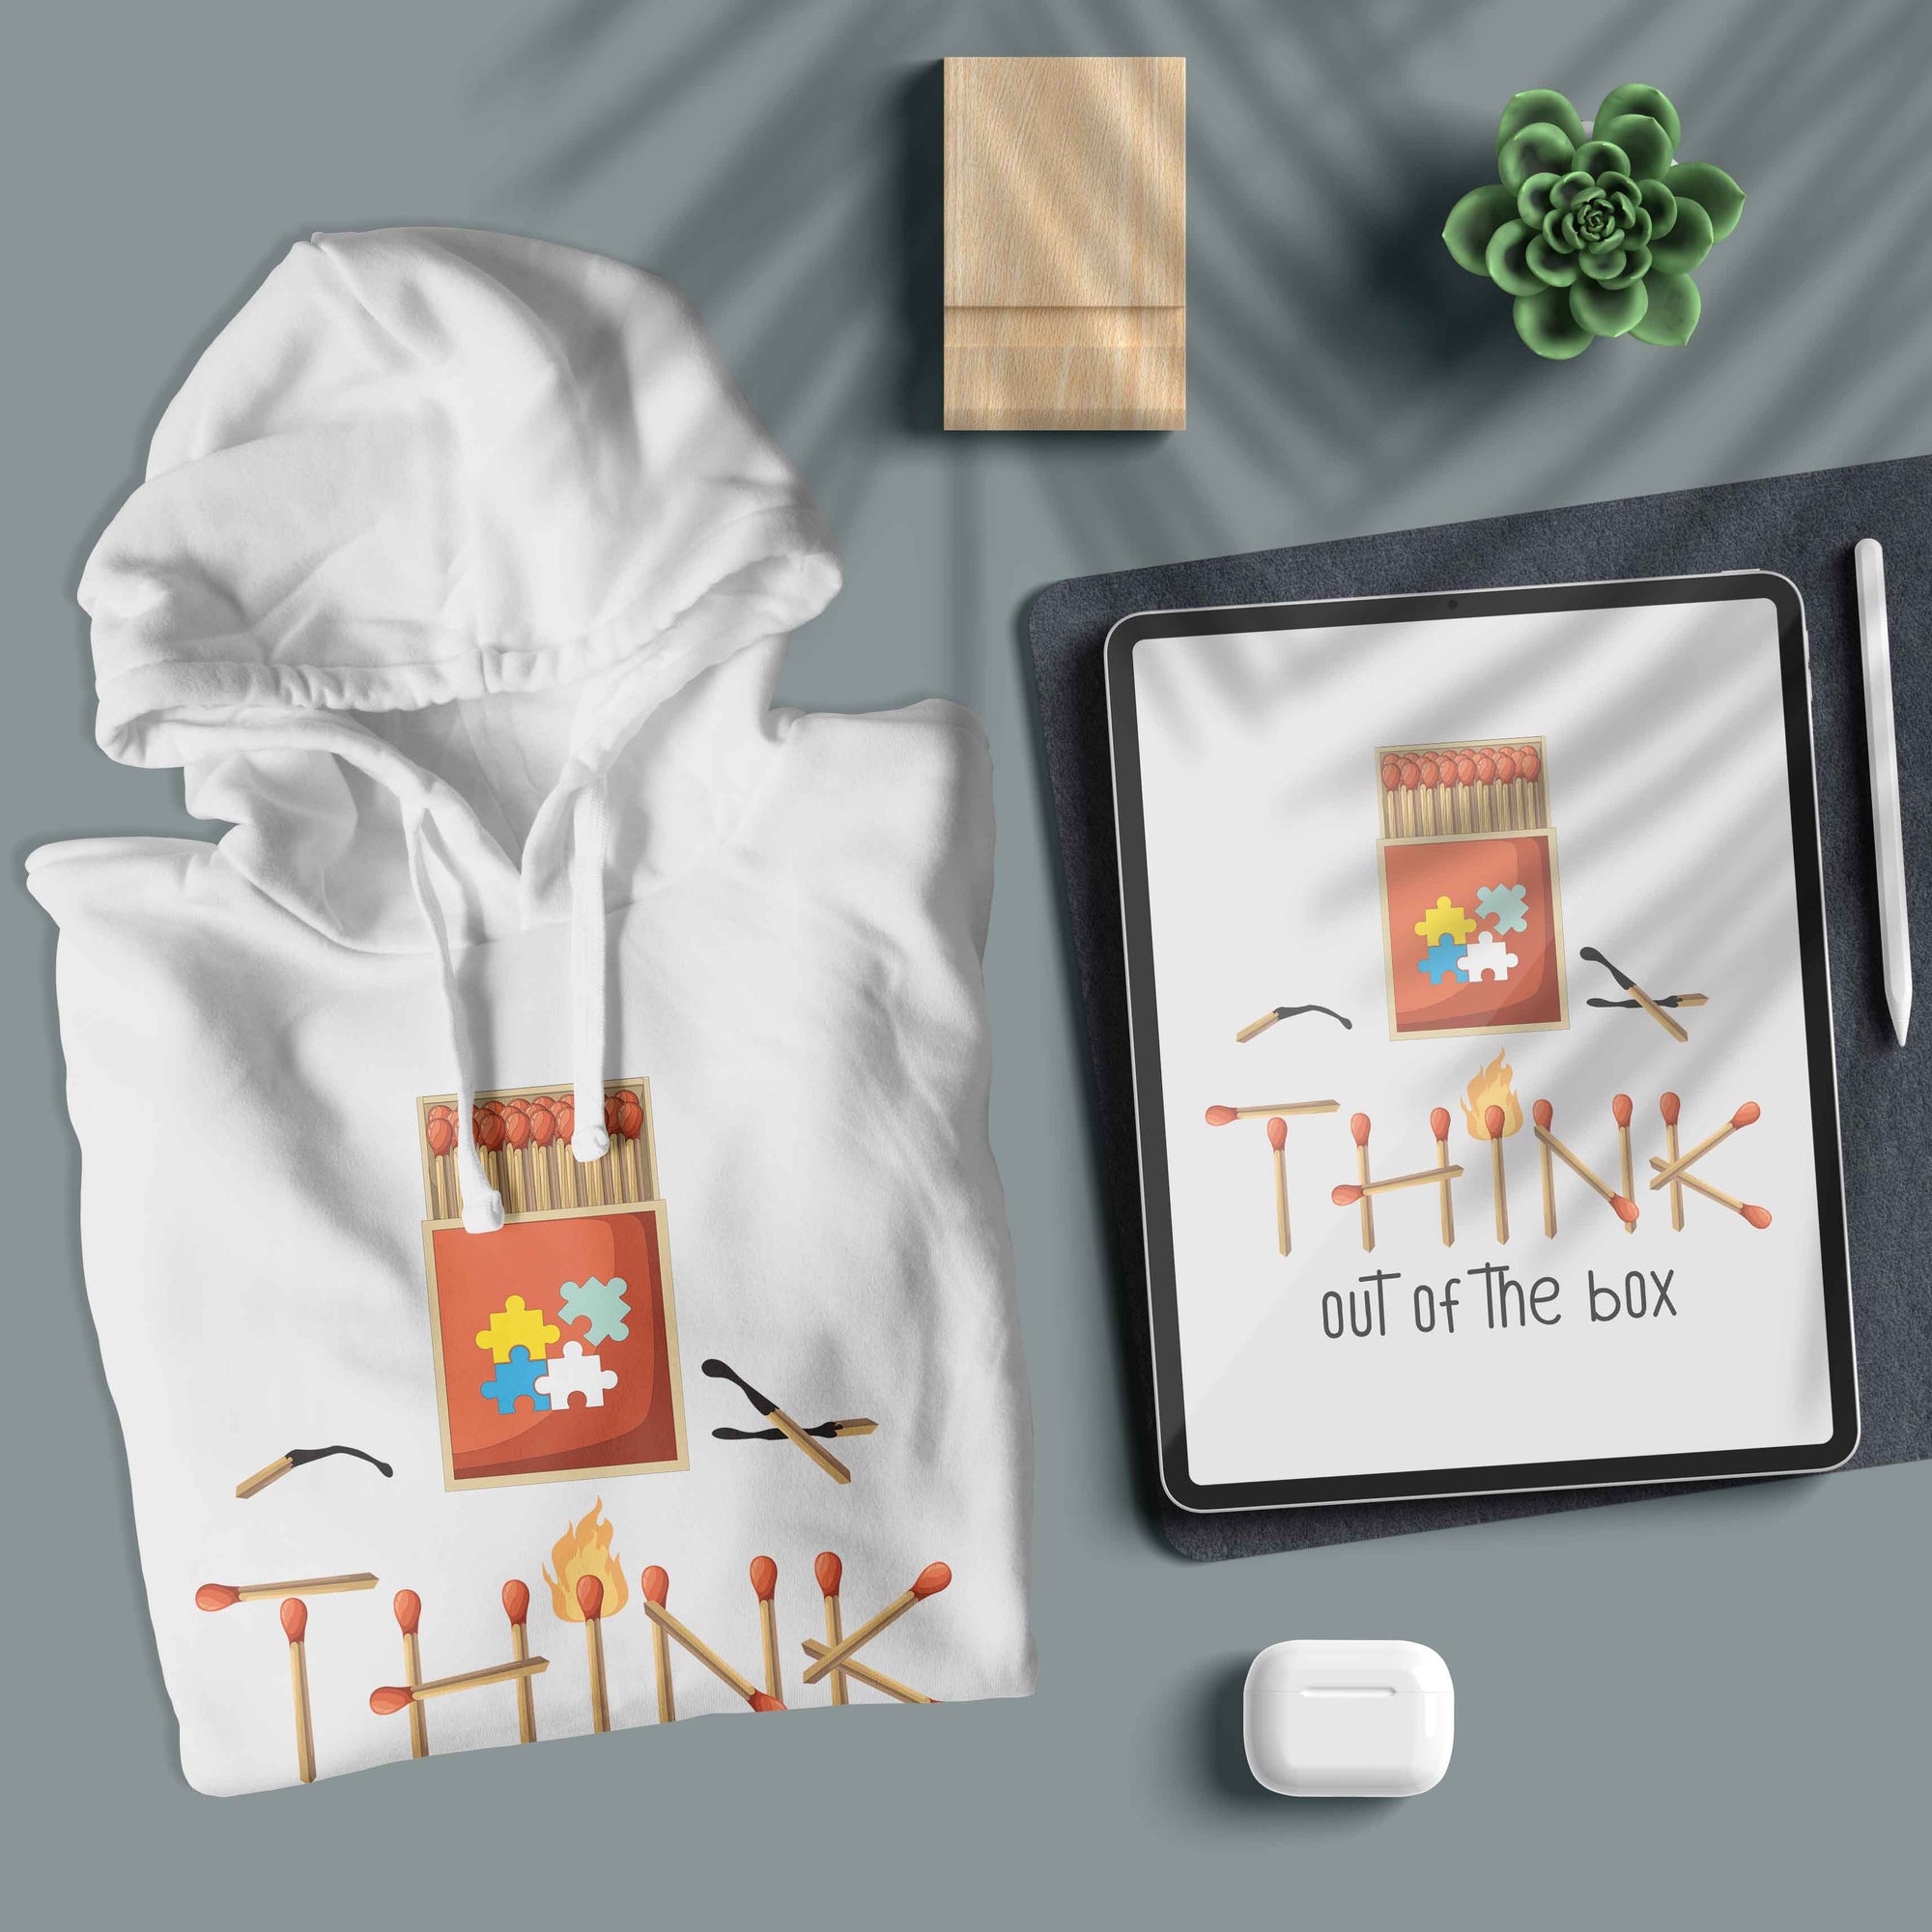 Think out of the box - Unisex Hoodie